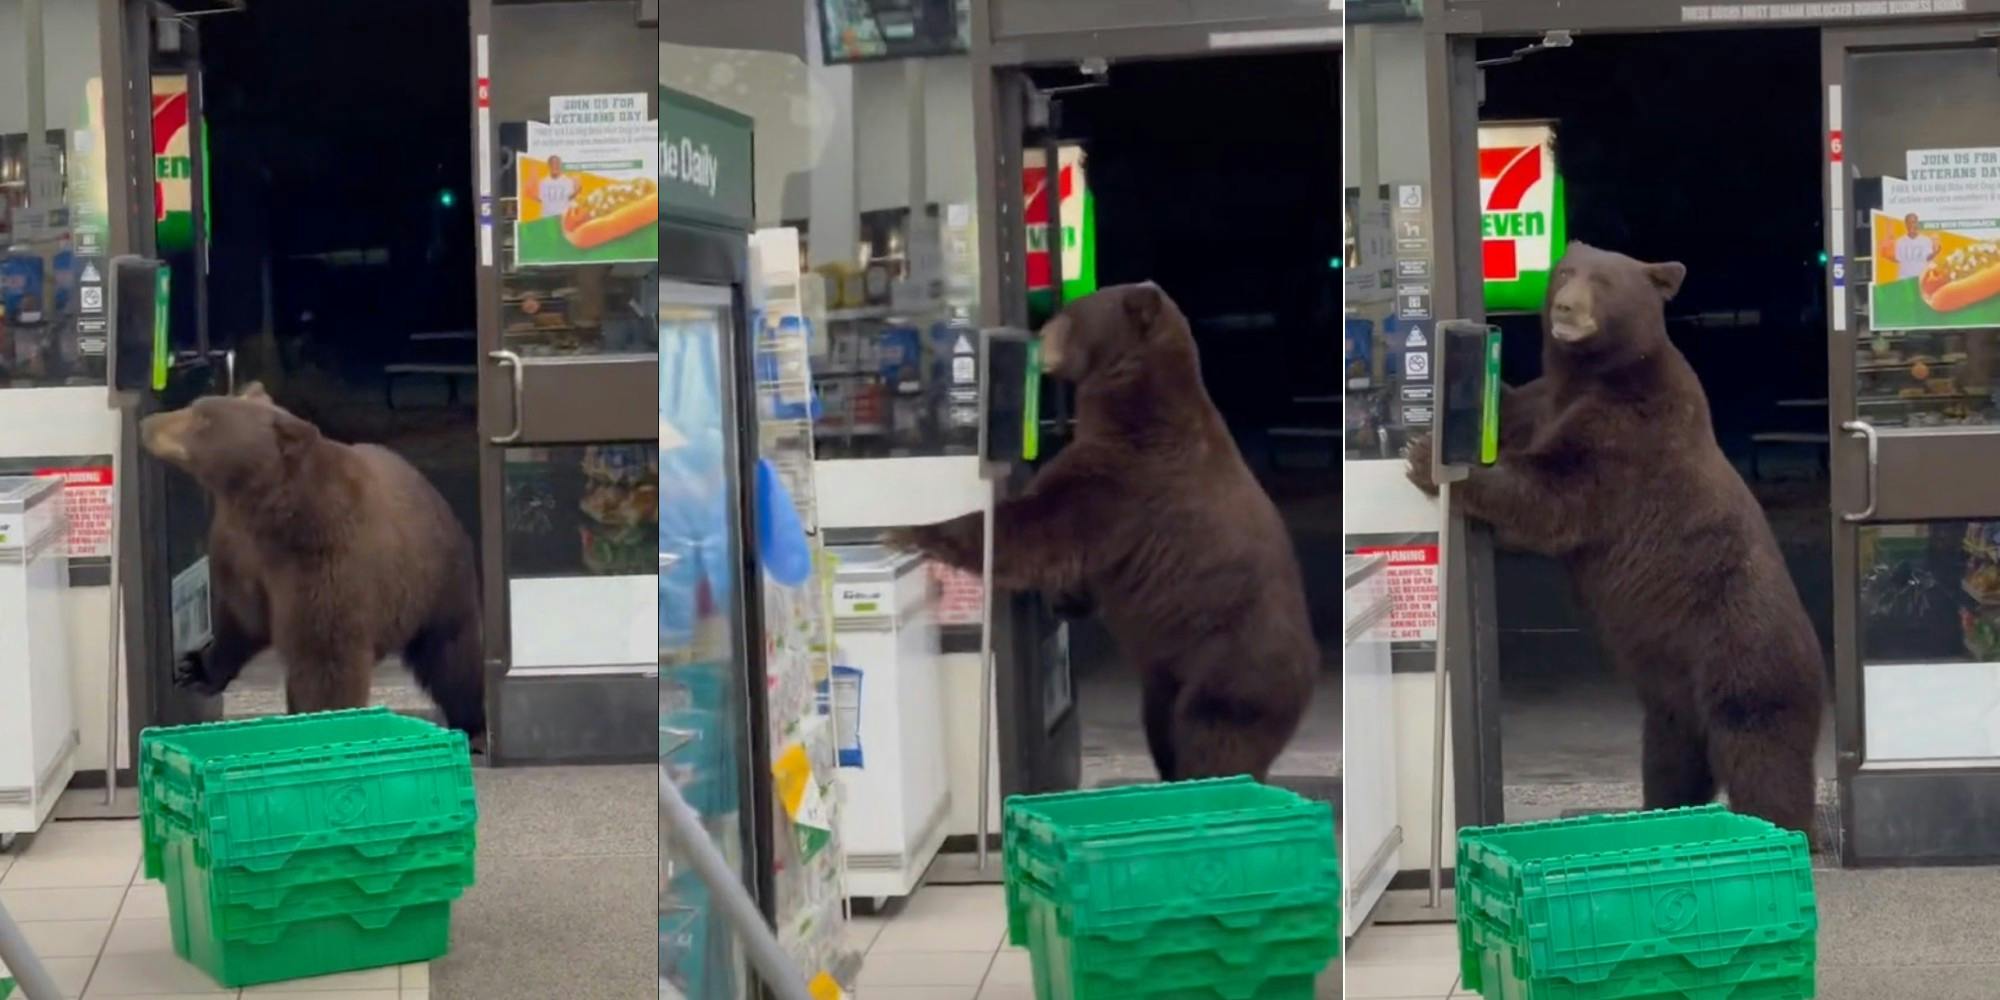 bear at the entrance of a 7-eleven